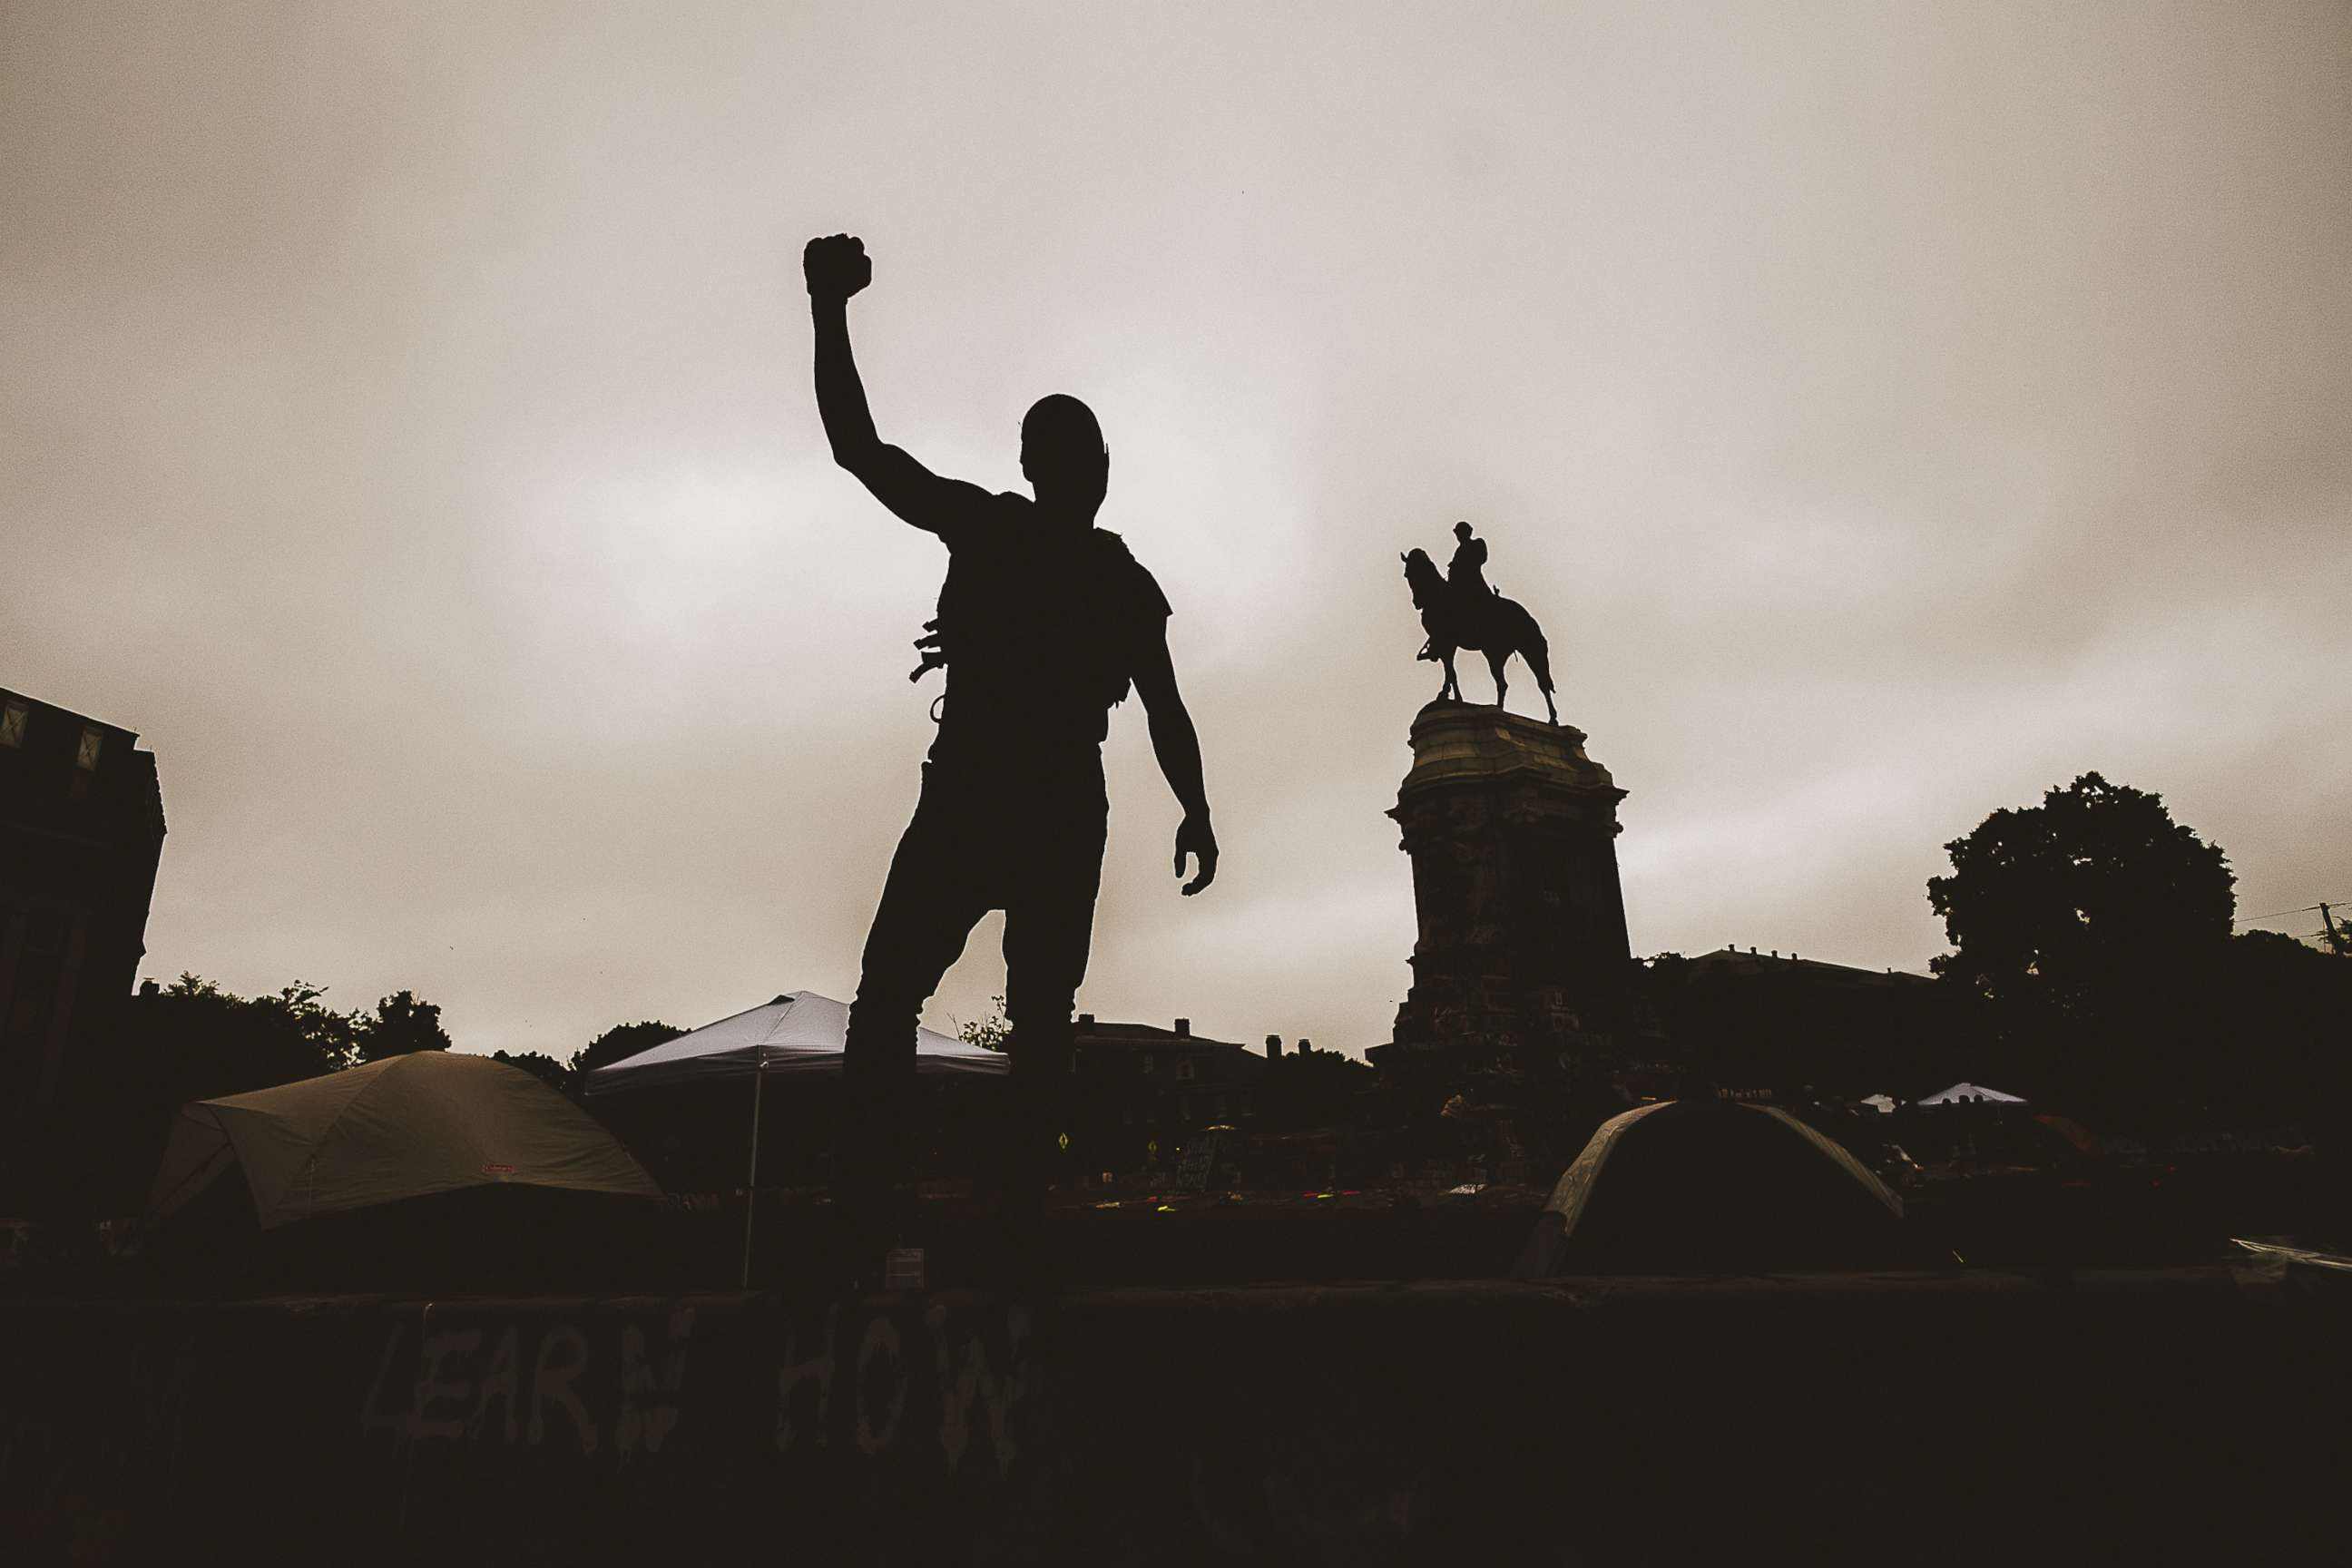 PHOTO: This photo taken on June 20, 2020, shows a silhouette of a man with his fist in the air at the Robert E. Lee monument in Richmond, Virginia. Protesters for racial justice have called for statues of Confederate leaders, like Lee, to be taken down.